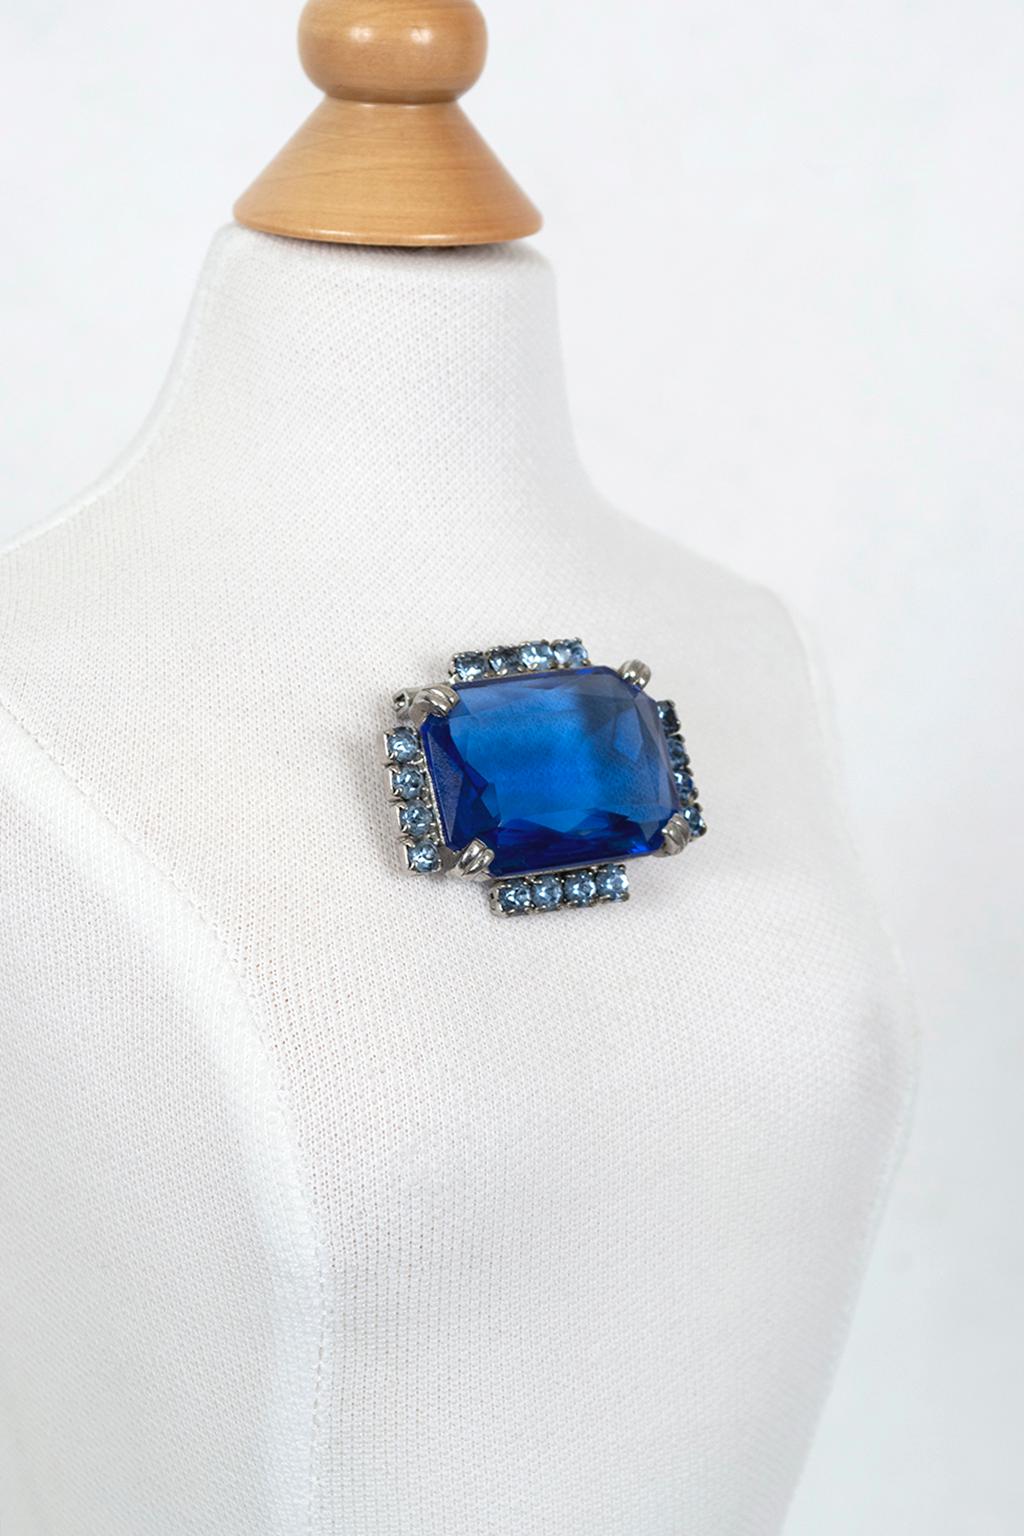 Cartier Style Emerald Cut Sapphire Crystal Brooch, Ear Crawler Demi Parure–1950s In Good Condition For Sale In Tucson, AZ